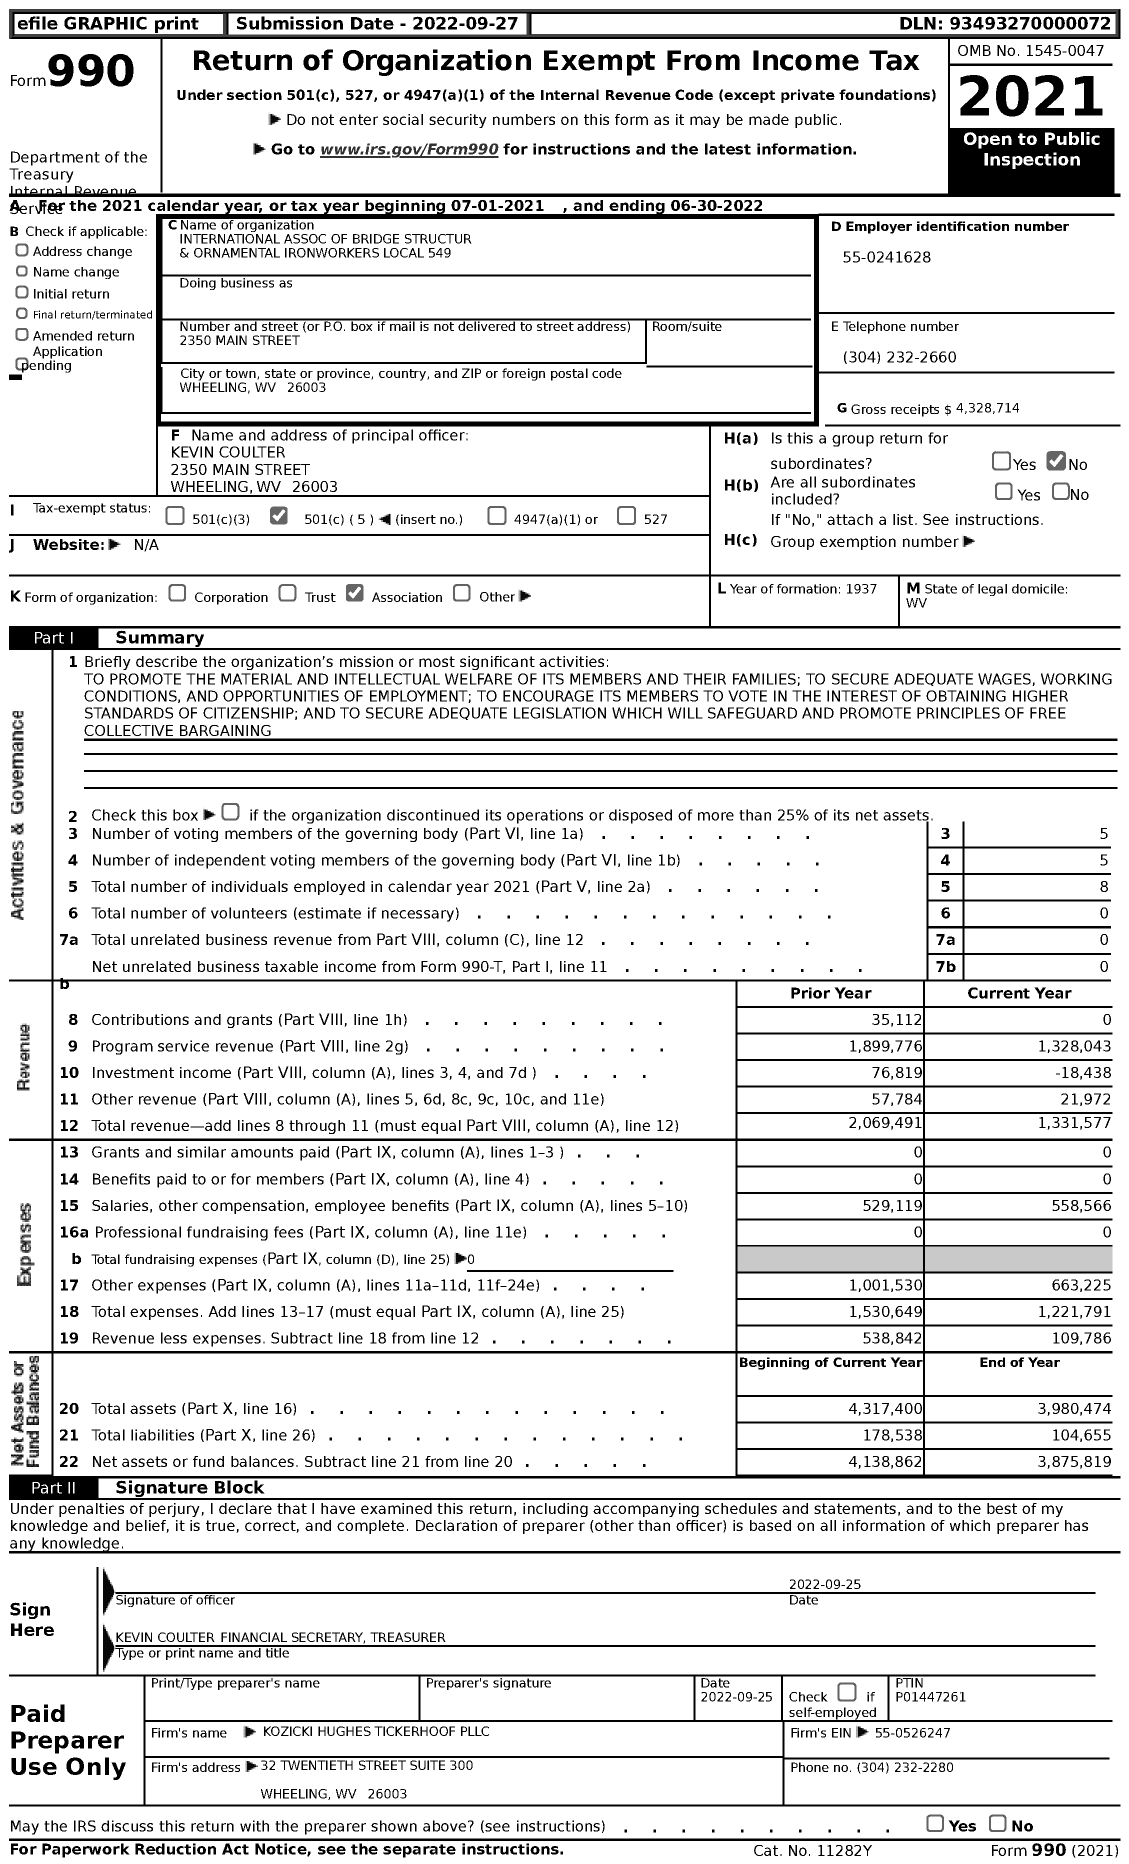 Image of first page of 2021 Form 990 for International Association of Bridge Structur and Ornamental Ironworkers Local 549